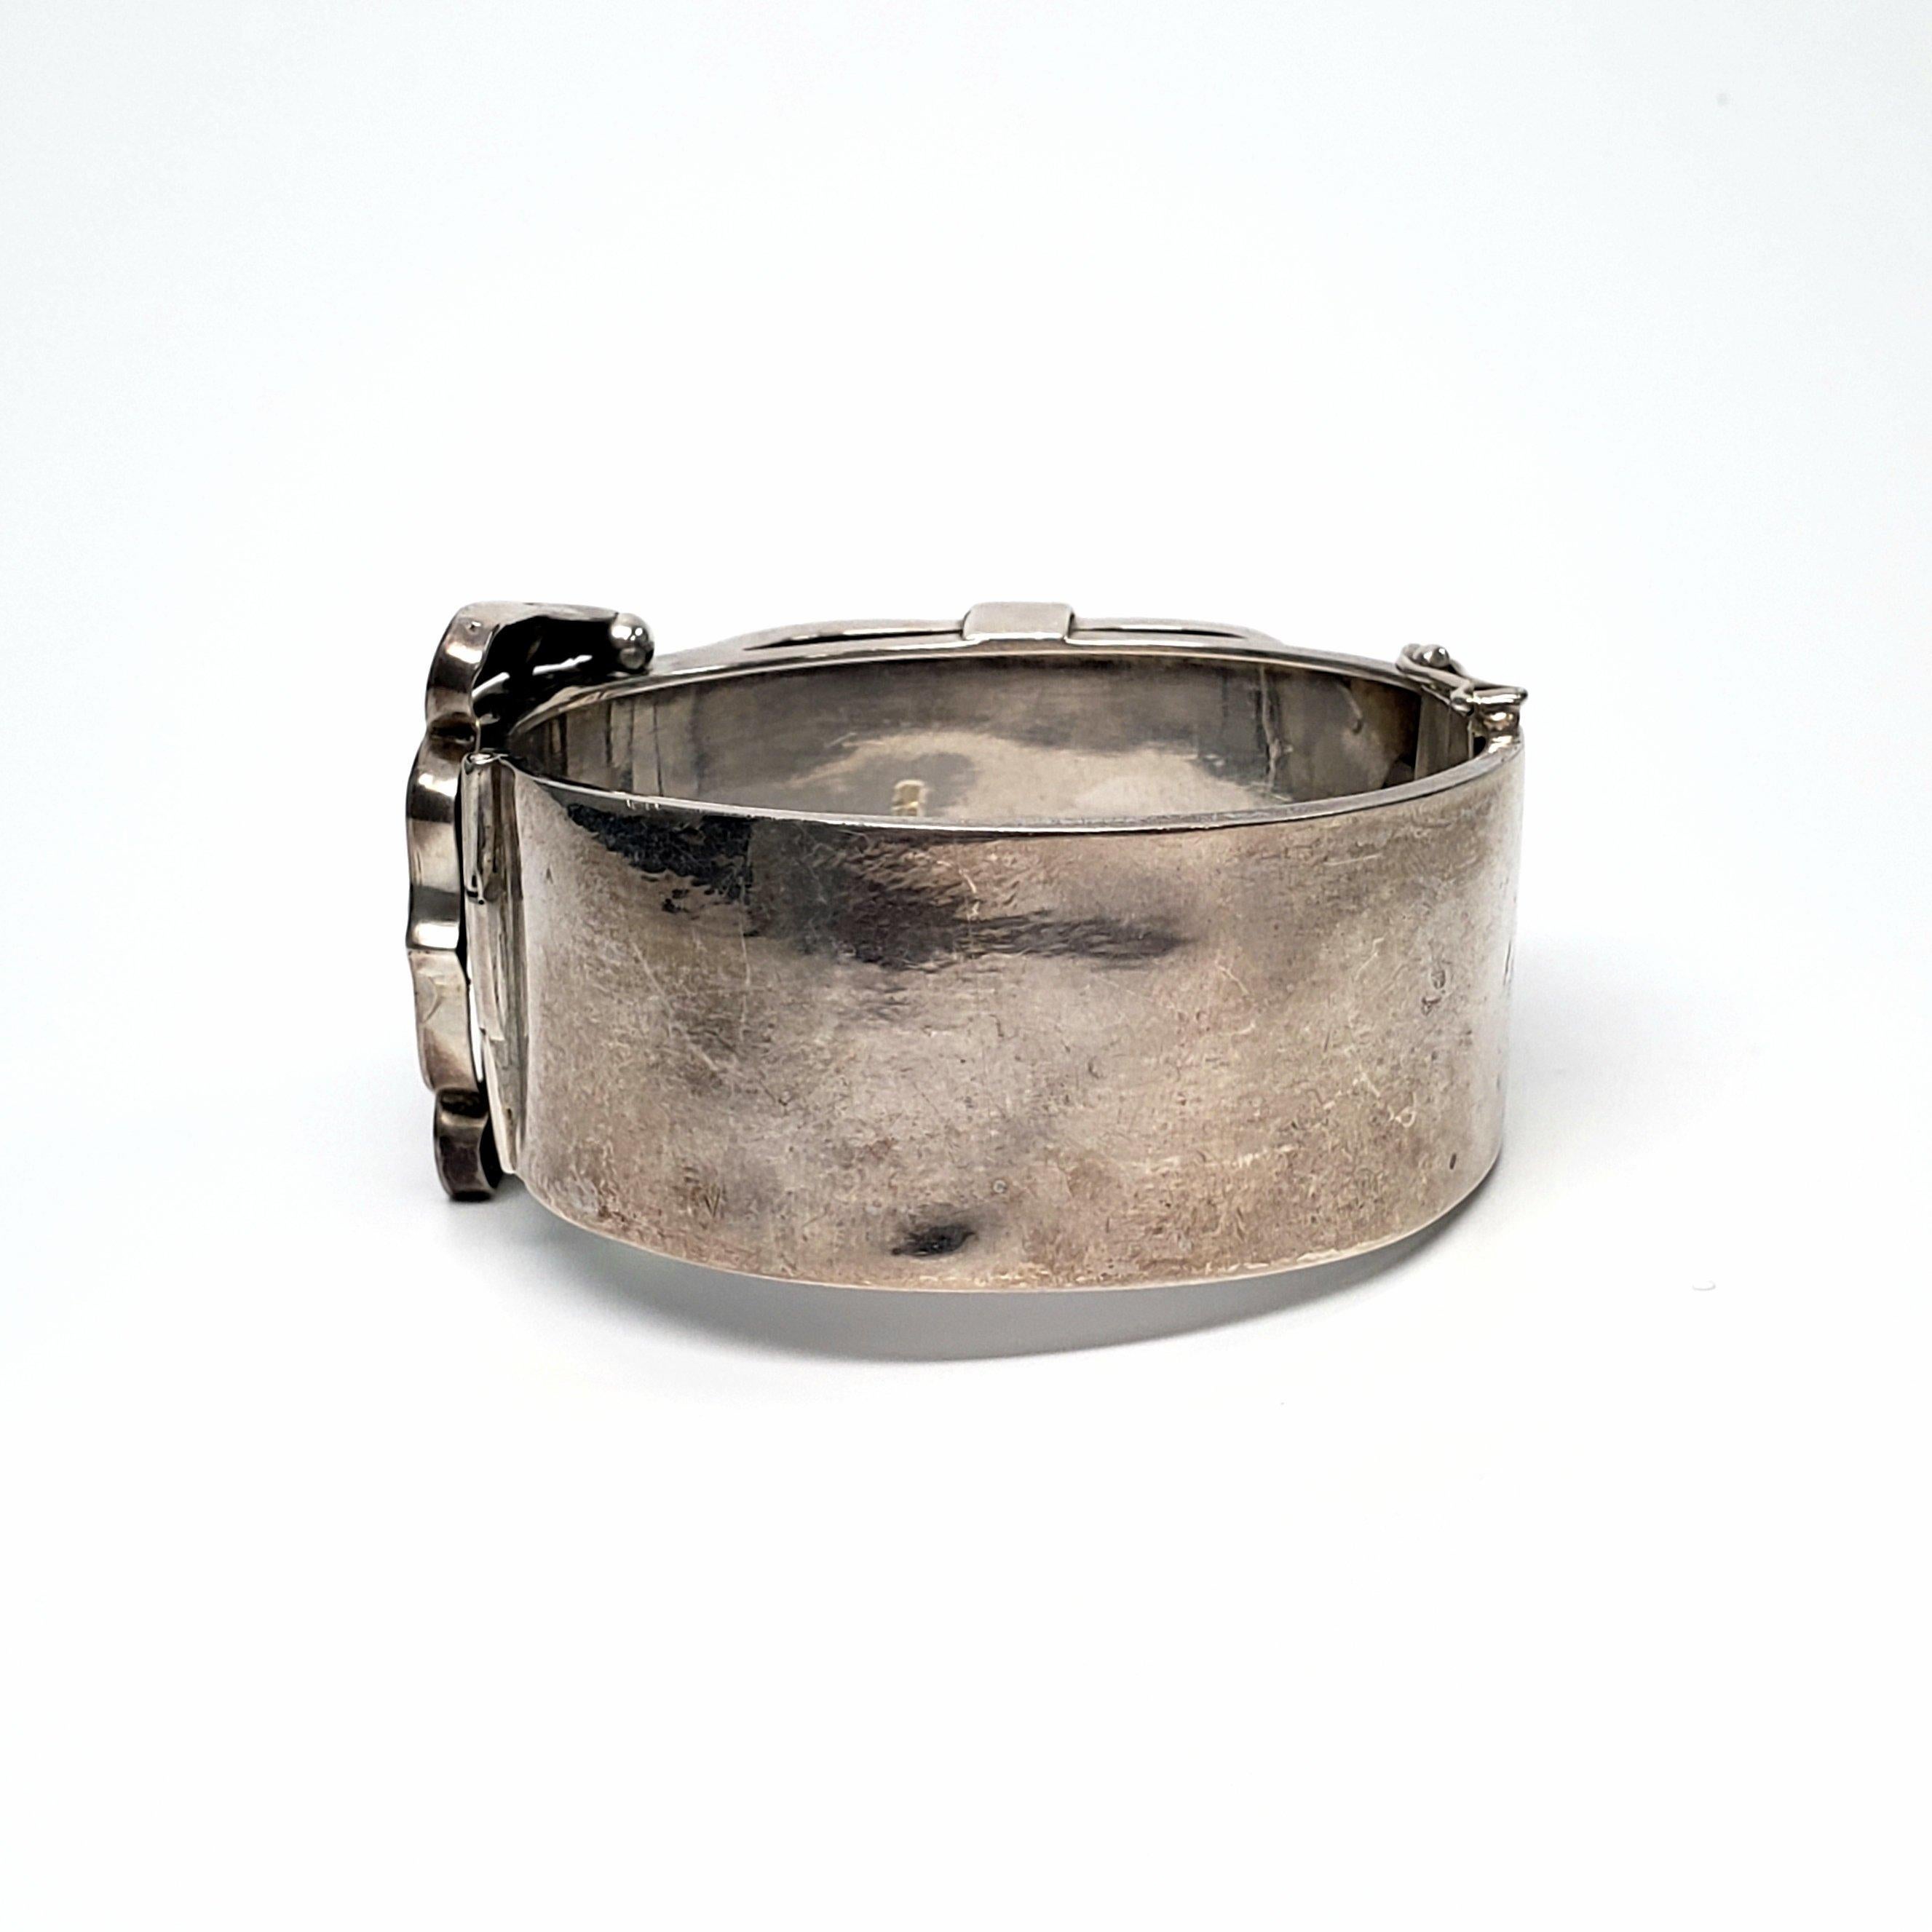 Antique English sterling silver hand etched belt buckle bracelet. Beautiful Art Nouveau piece with floral hand etched design in front, smooth back. Circa 1908. Hidden clasp closure with safety lock. 
Measures 7